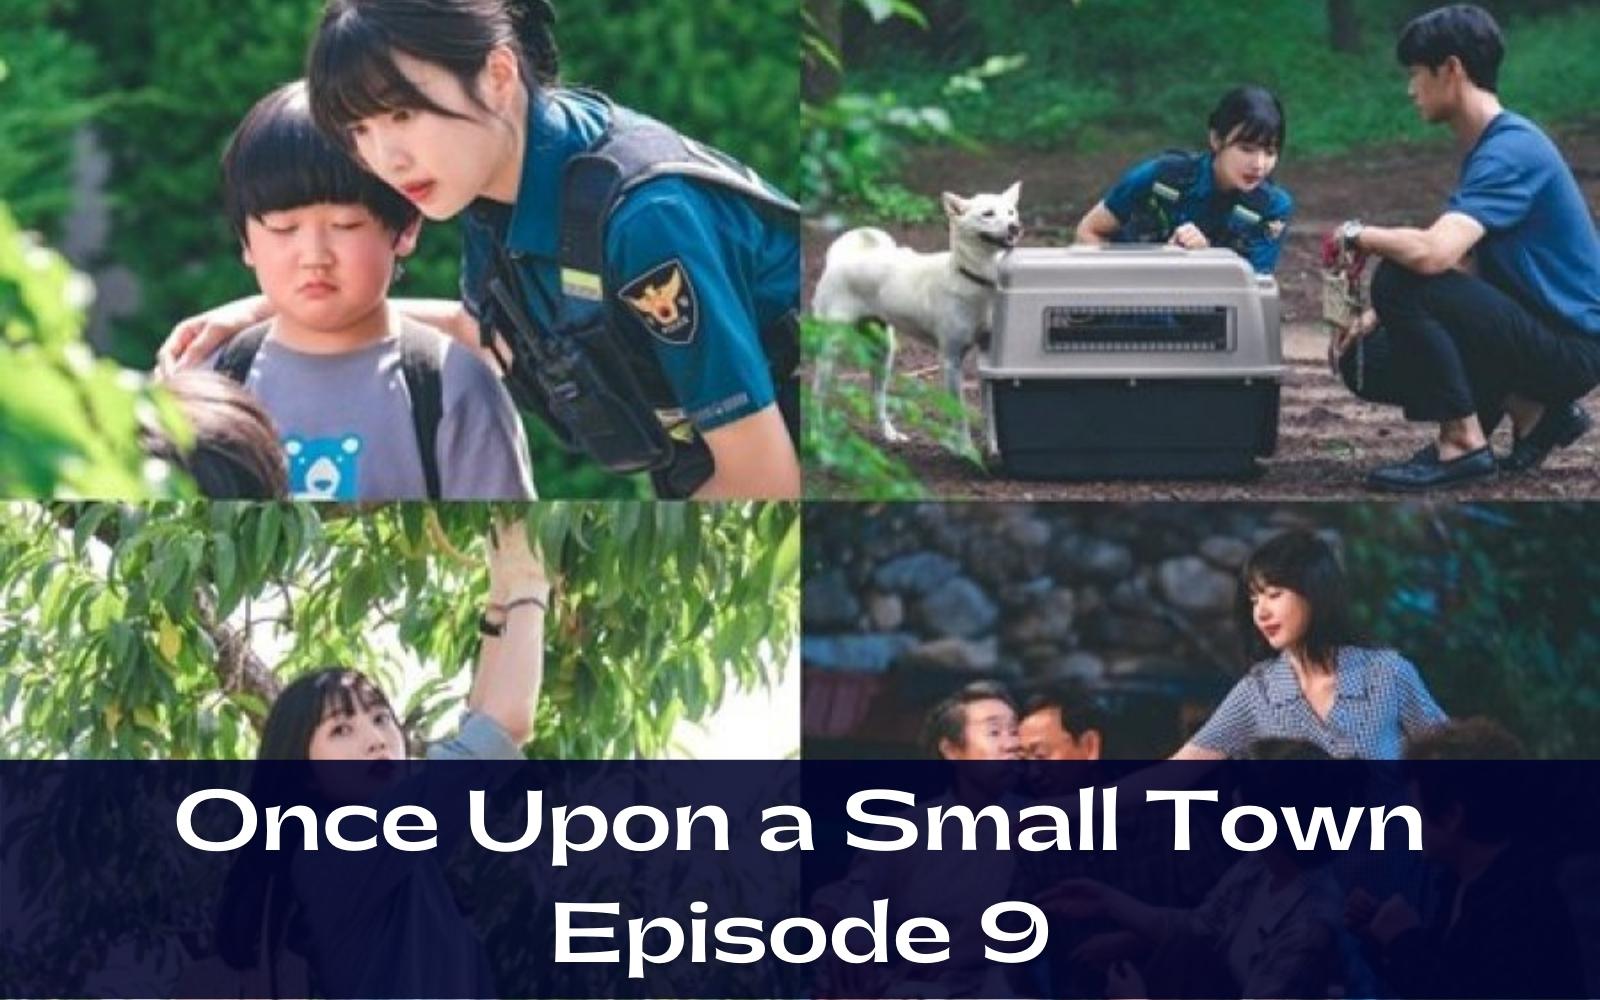 Once Upon a Small Town Episode 9 : Countdown, Release Date, Spoiler, Recap, Review & Where to Watch